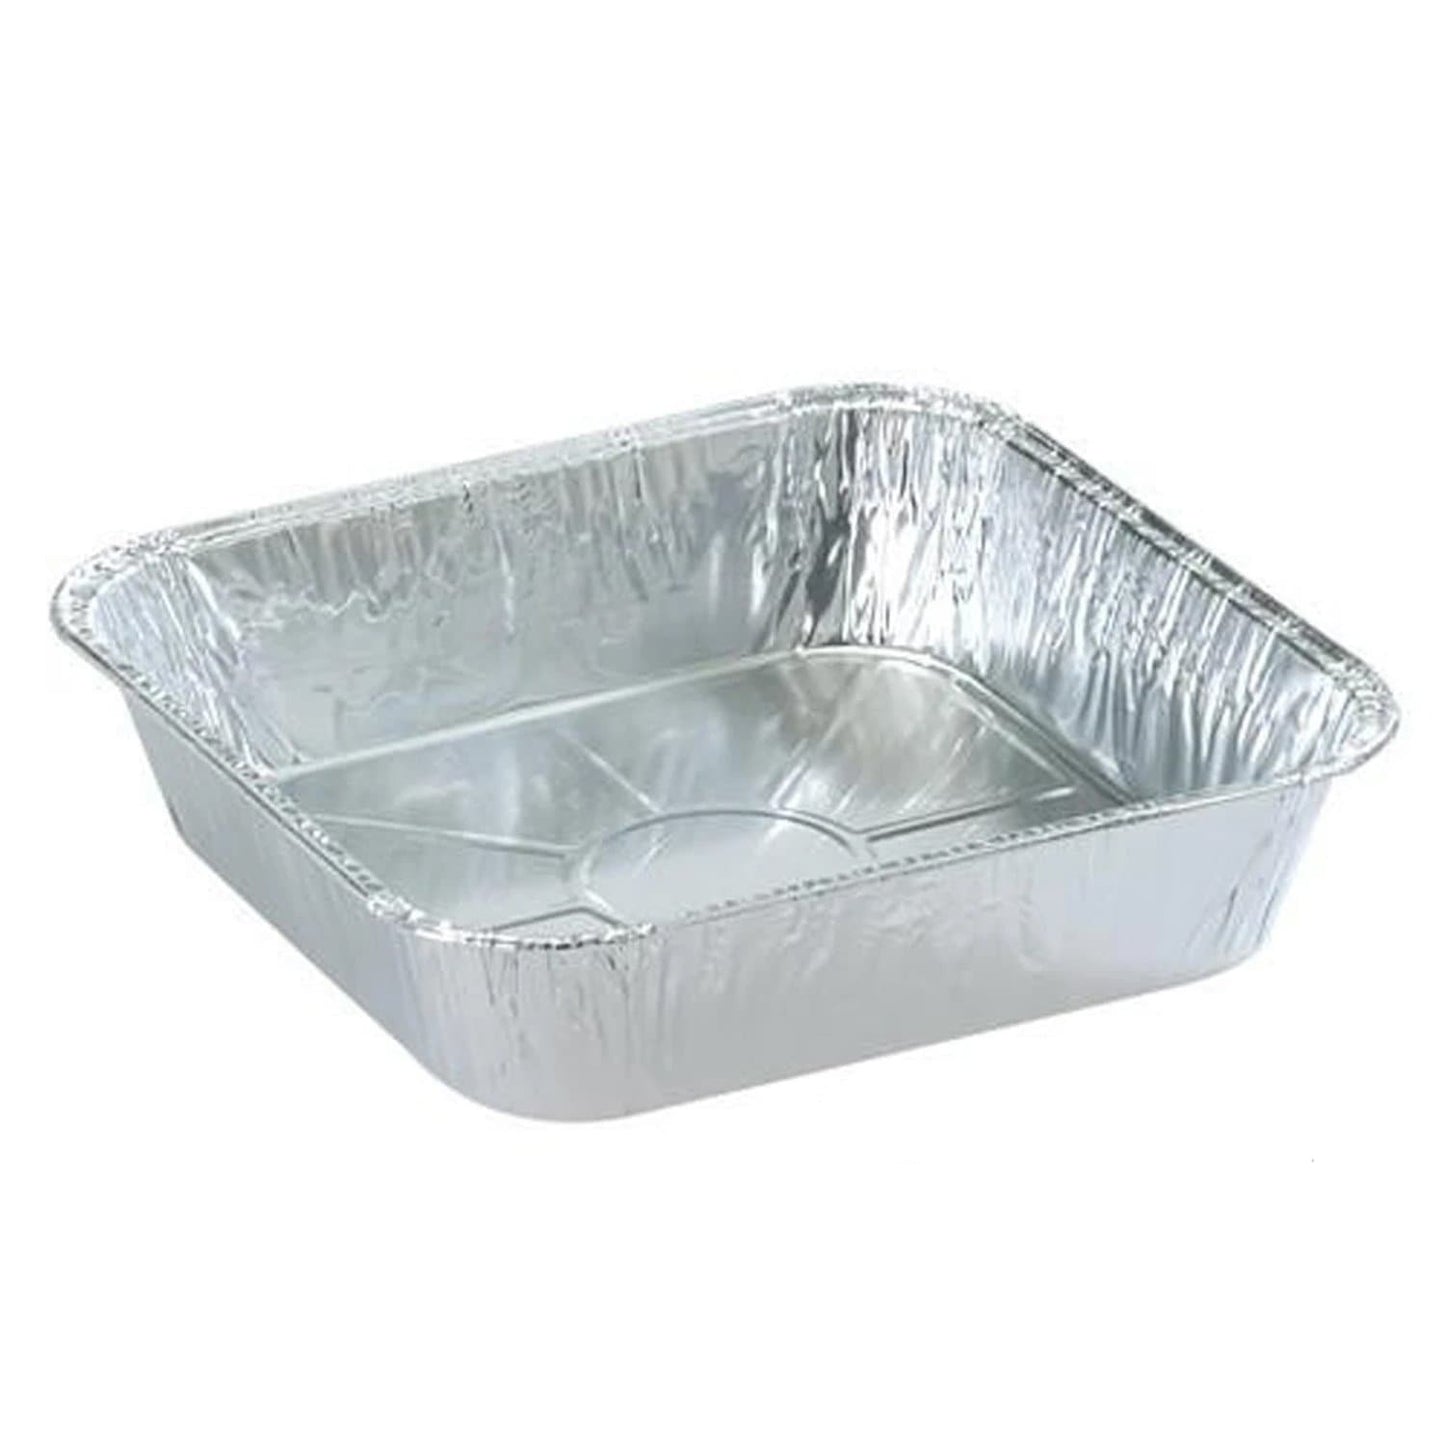 Square Foil Cake Pan 8 x 8 with Lid 5 Sets